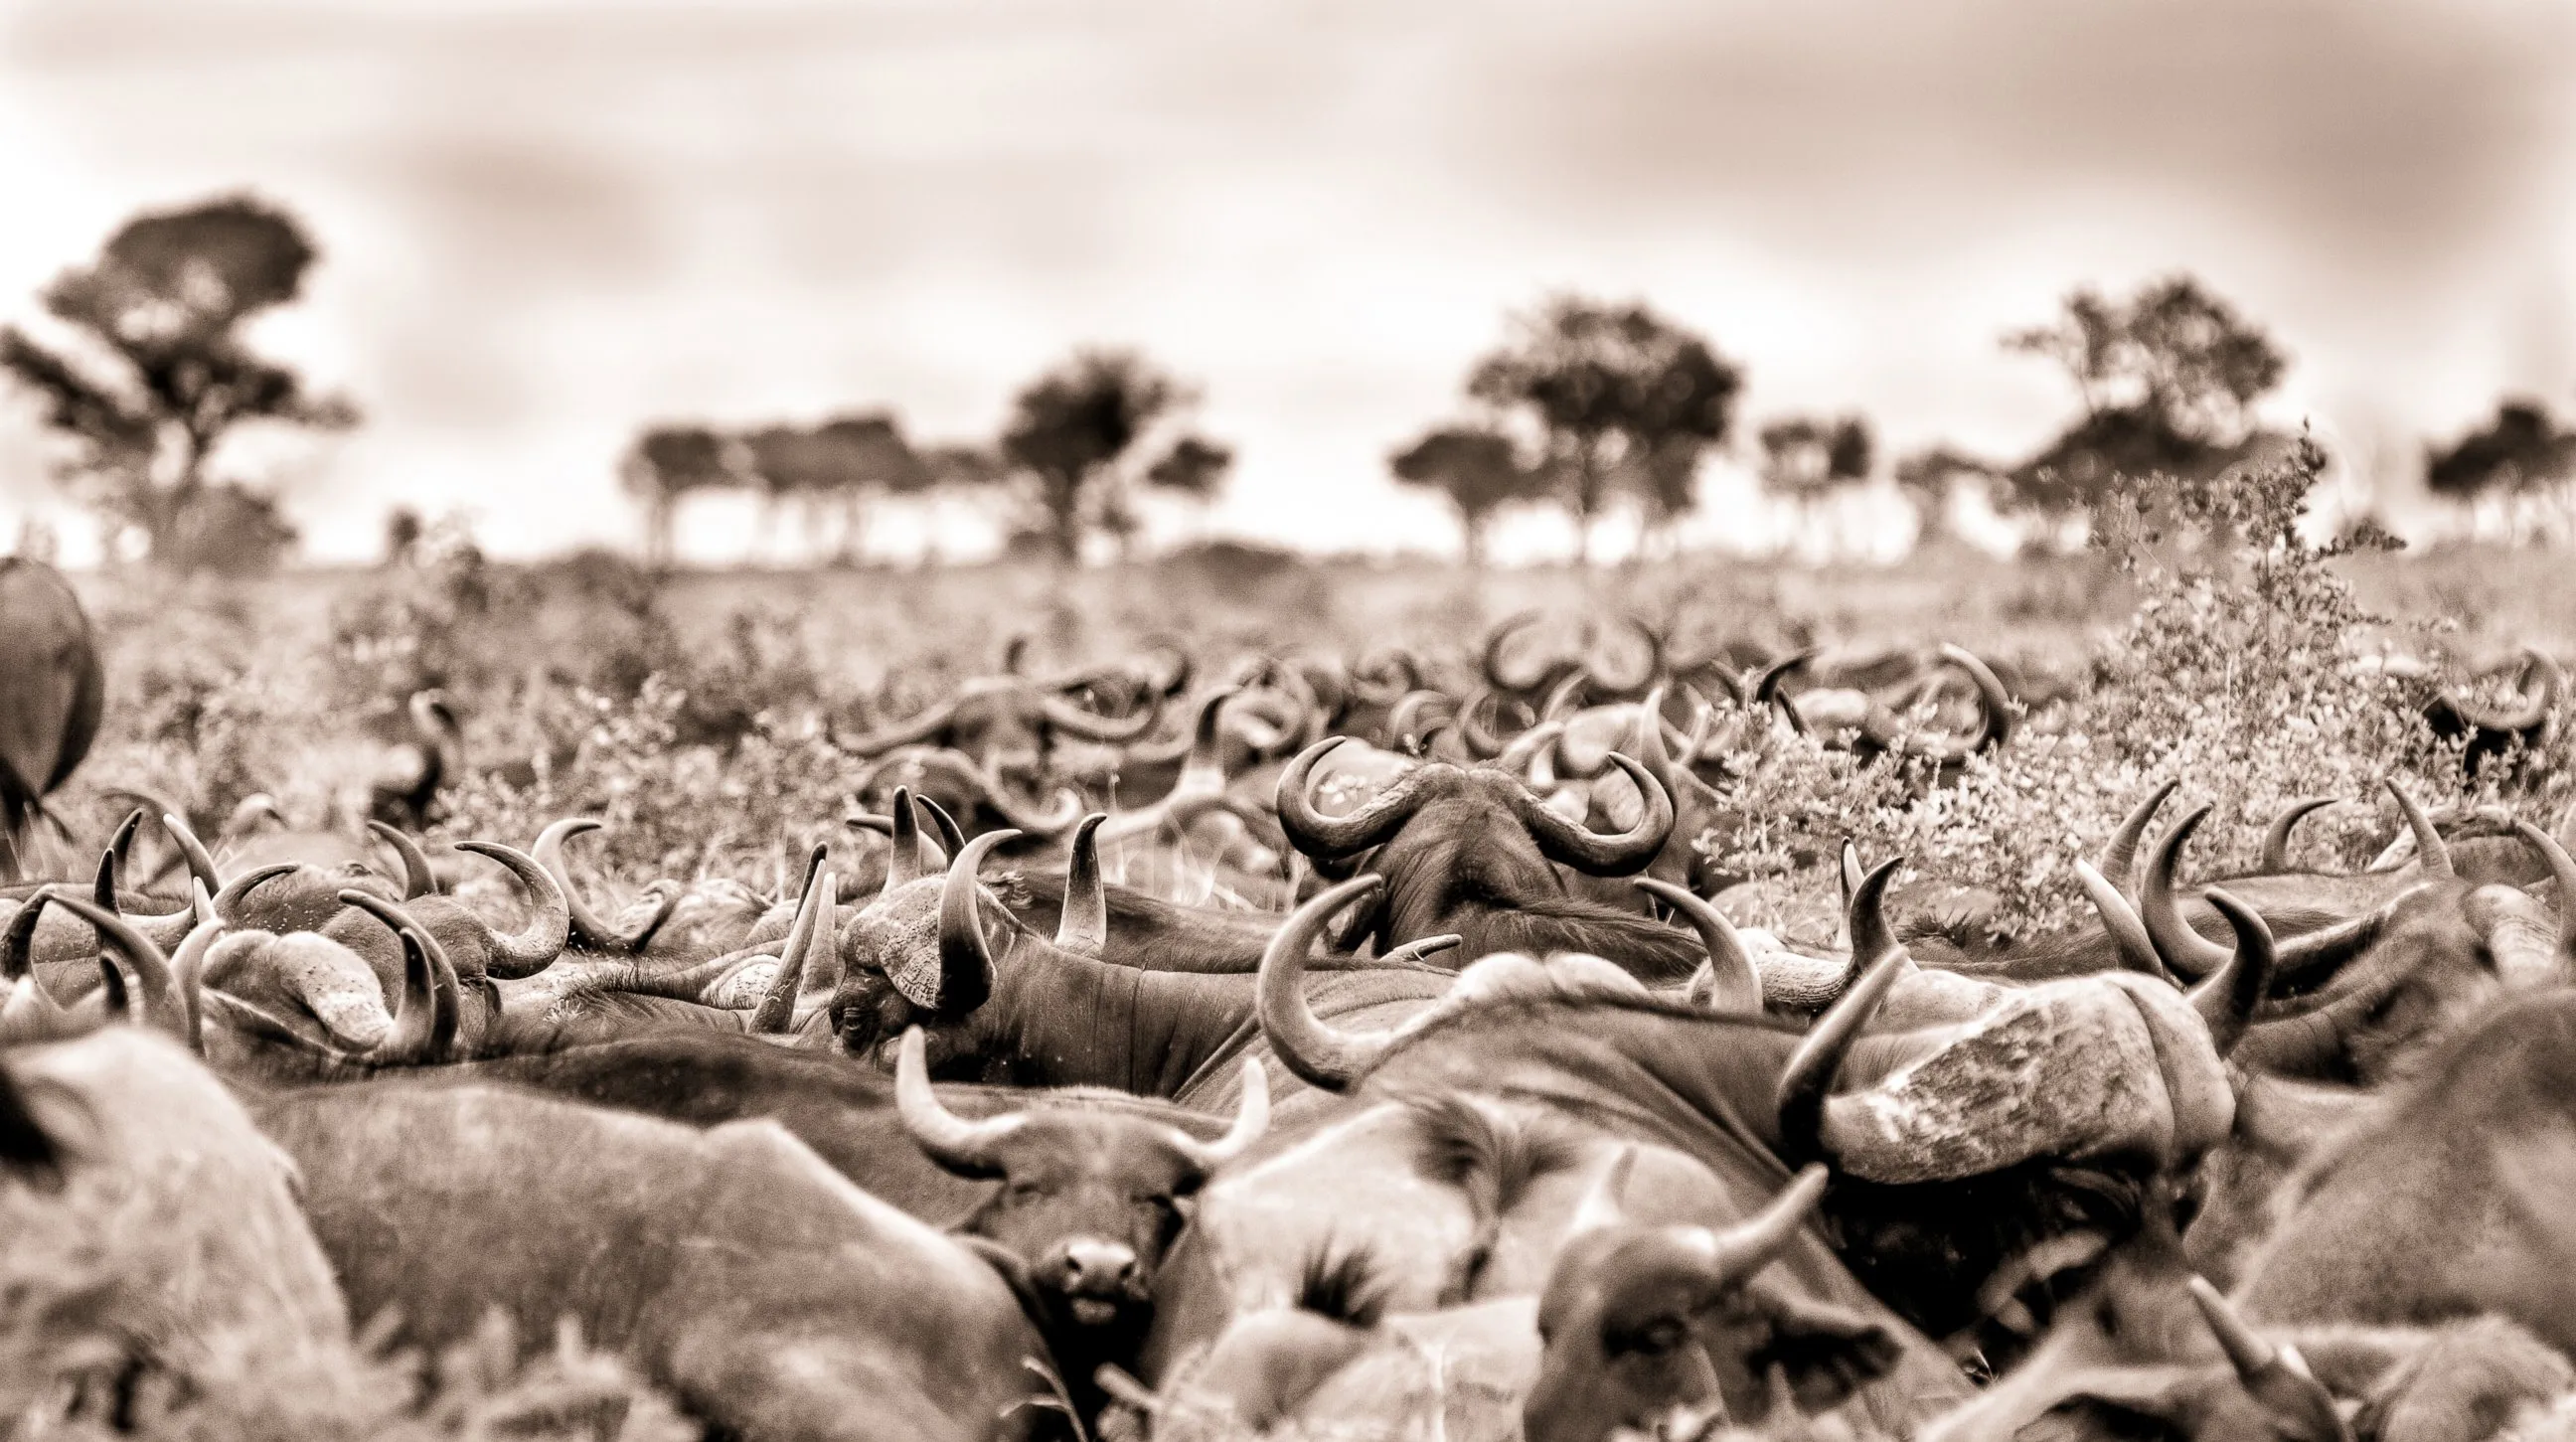 2015 Africa Geographic Photographer Of The Year Award